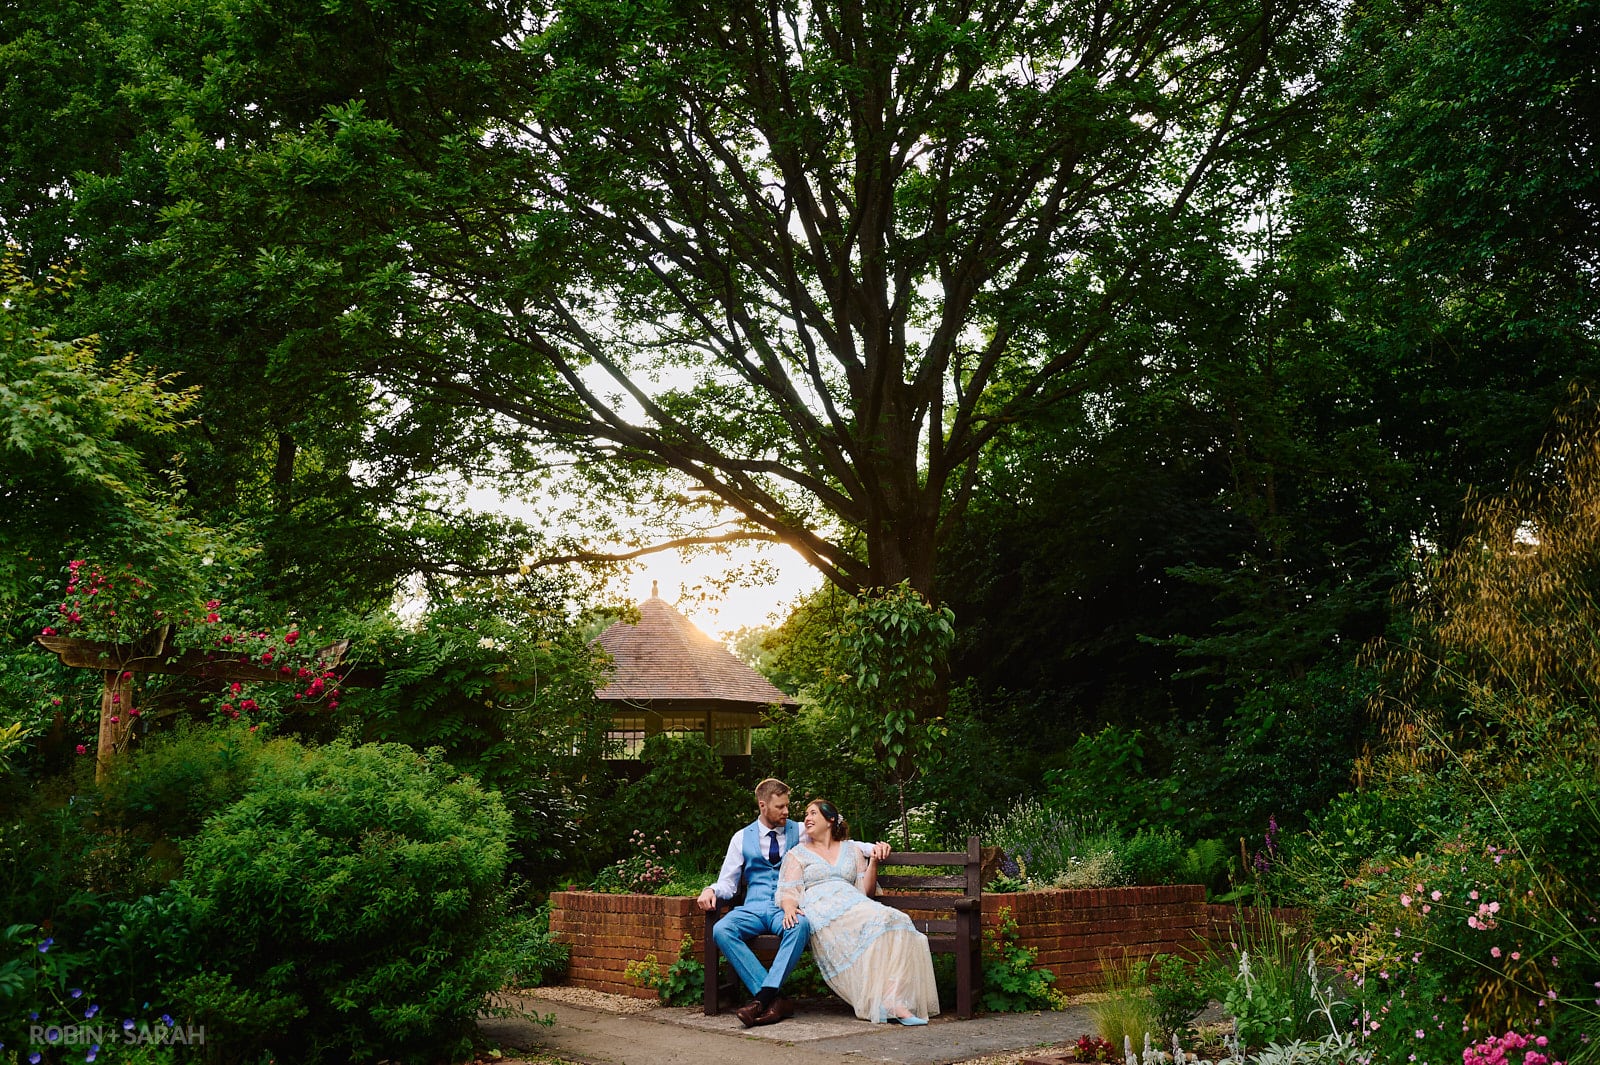 Bride and groom sitting together on bench surrounded by beautiful gardens at Avoncroft Museum